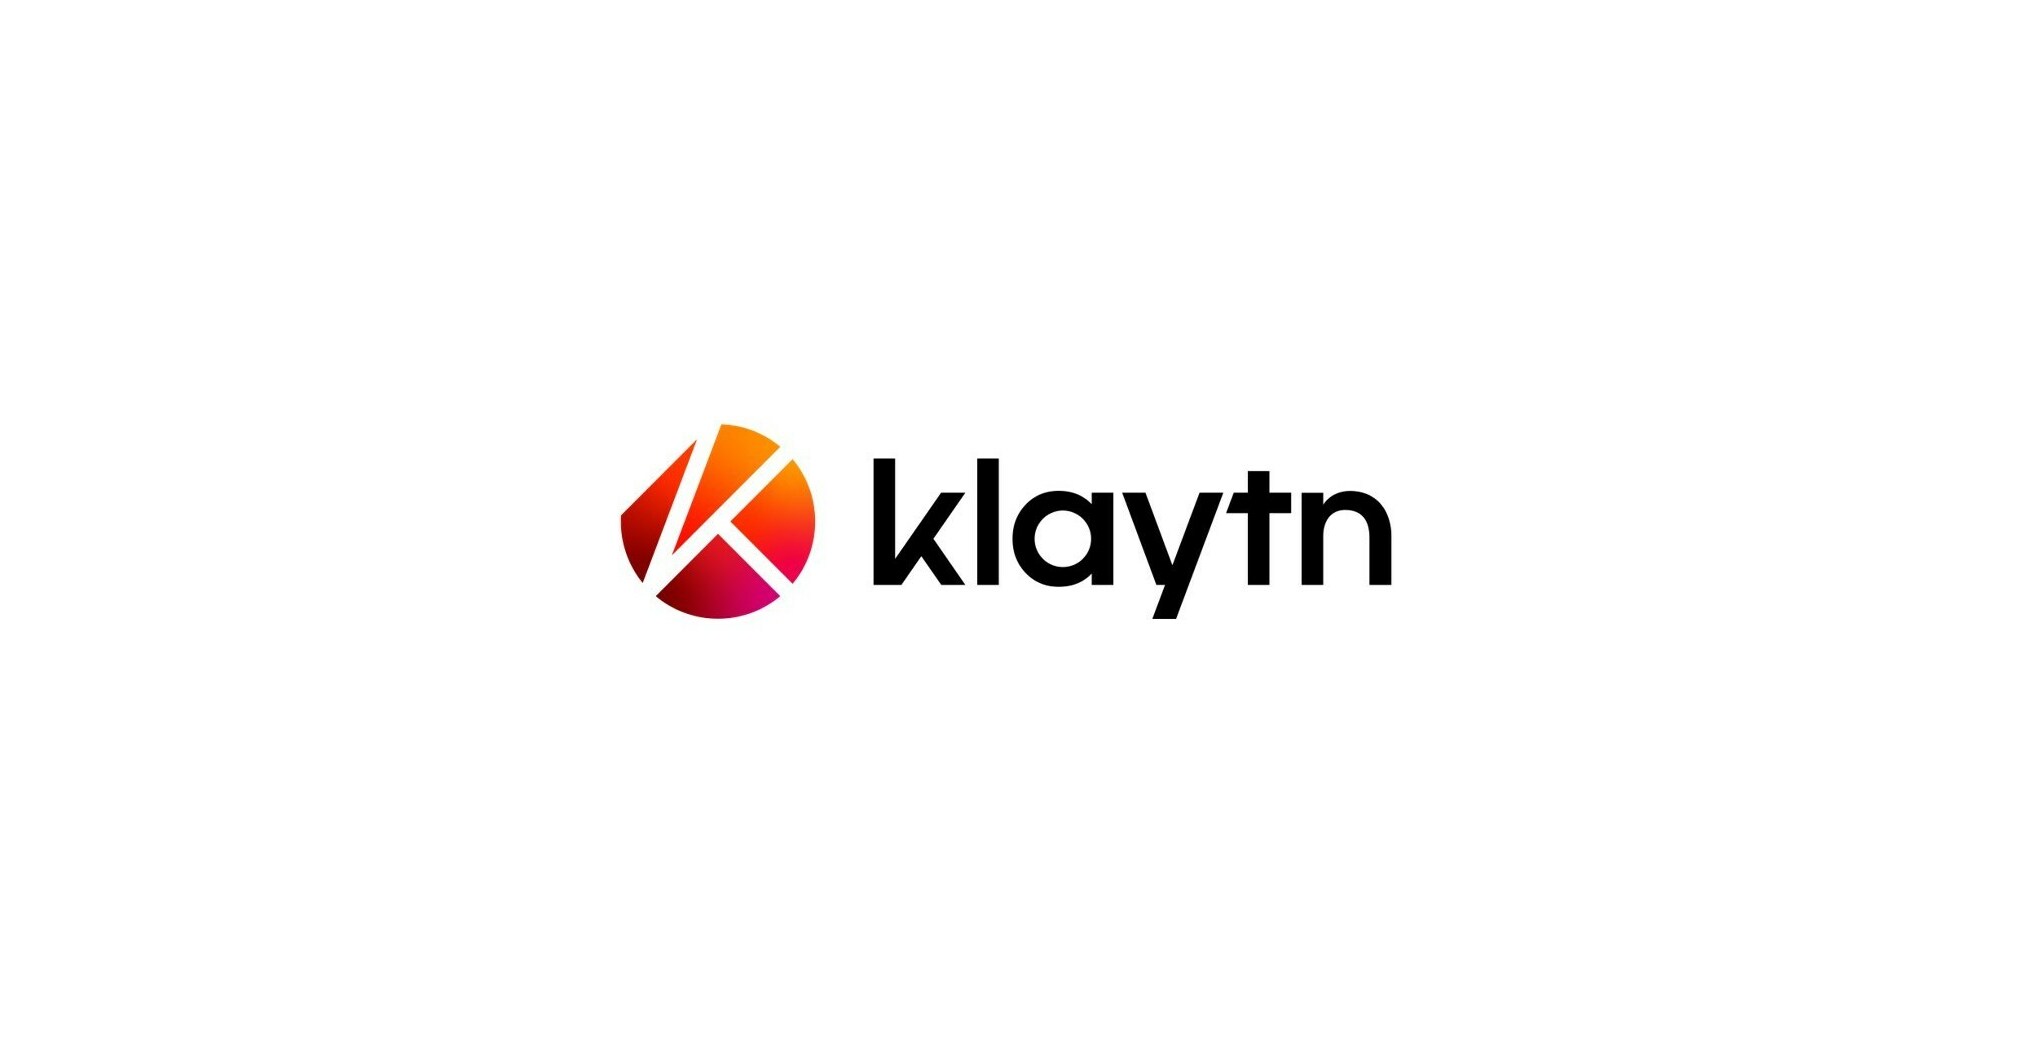 klaytn-and-finschia-jointly-propose-a-chain-merge-to-create-asia-s-leading-blockchain-ecosystem